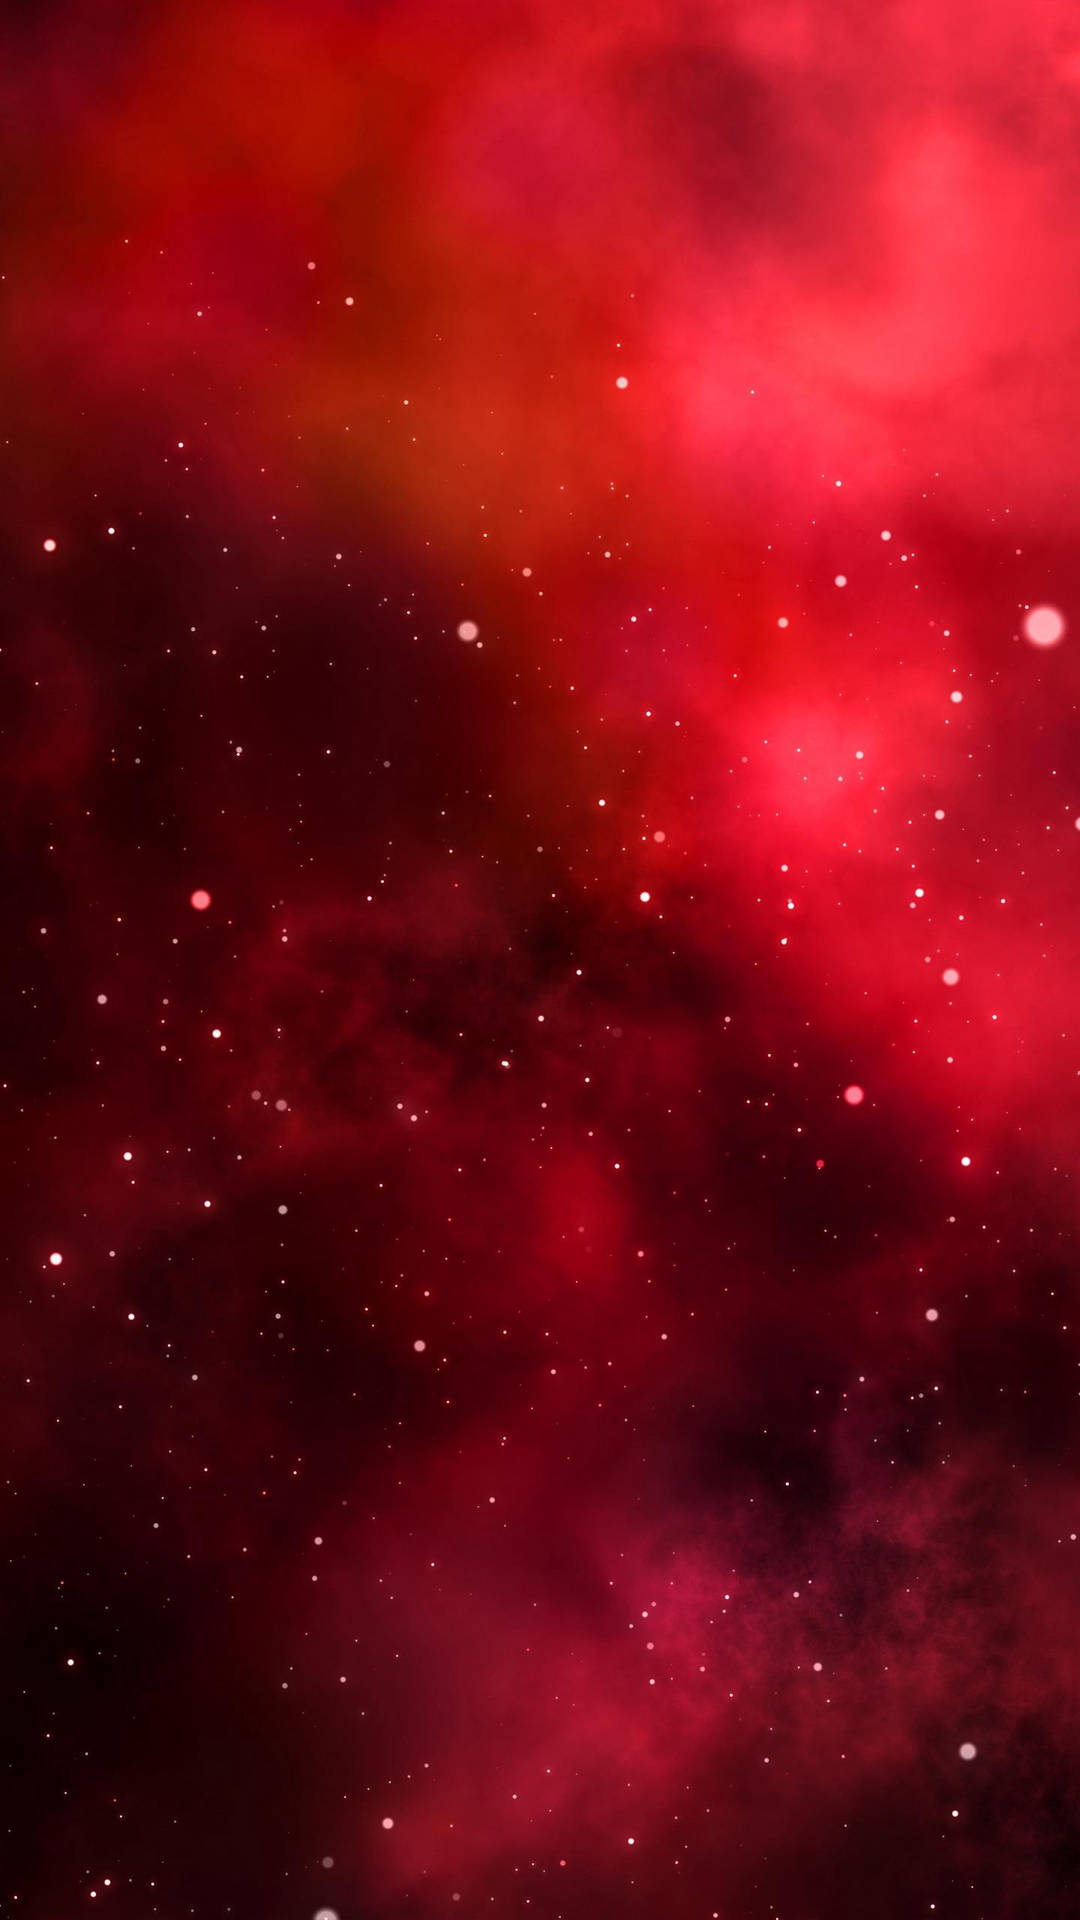 Galaxy In Red Iphone Wallpaper